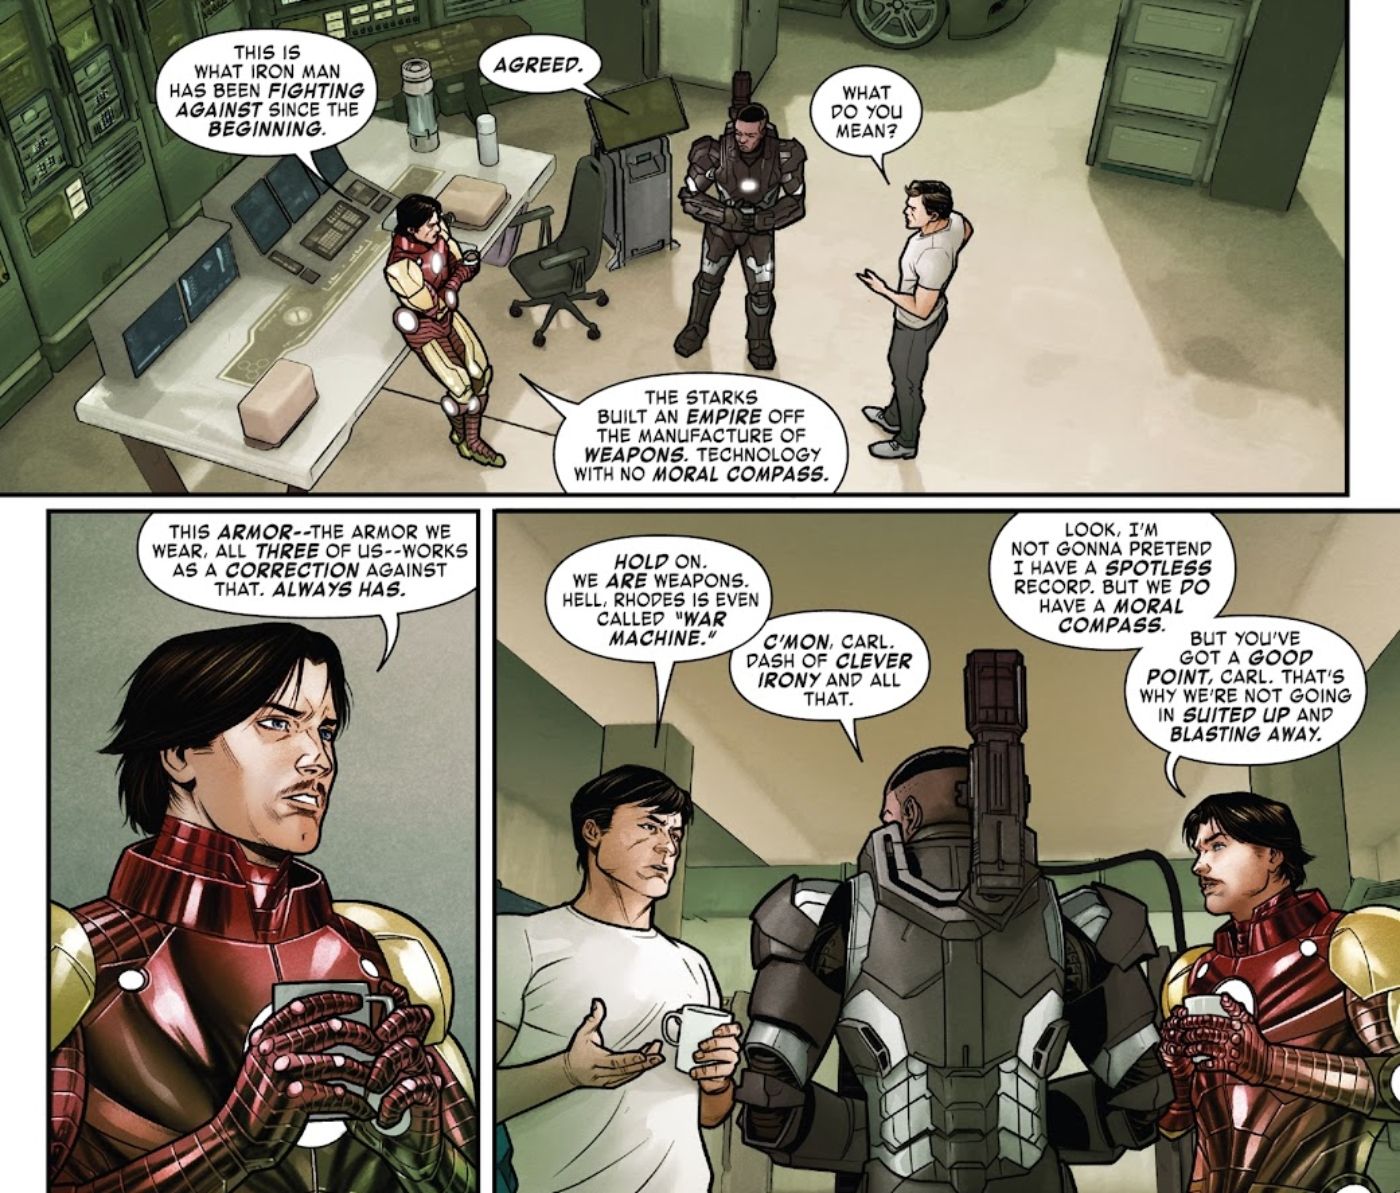 Iron Man and War Machine planning a strategy against their foe. 